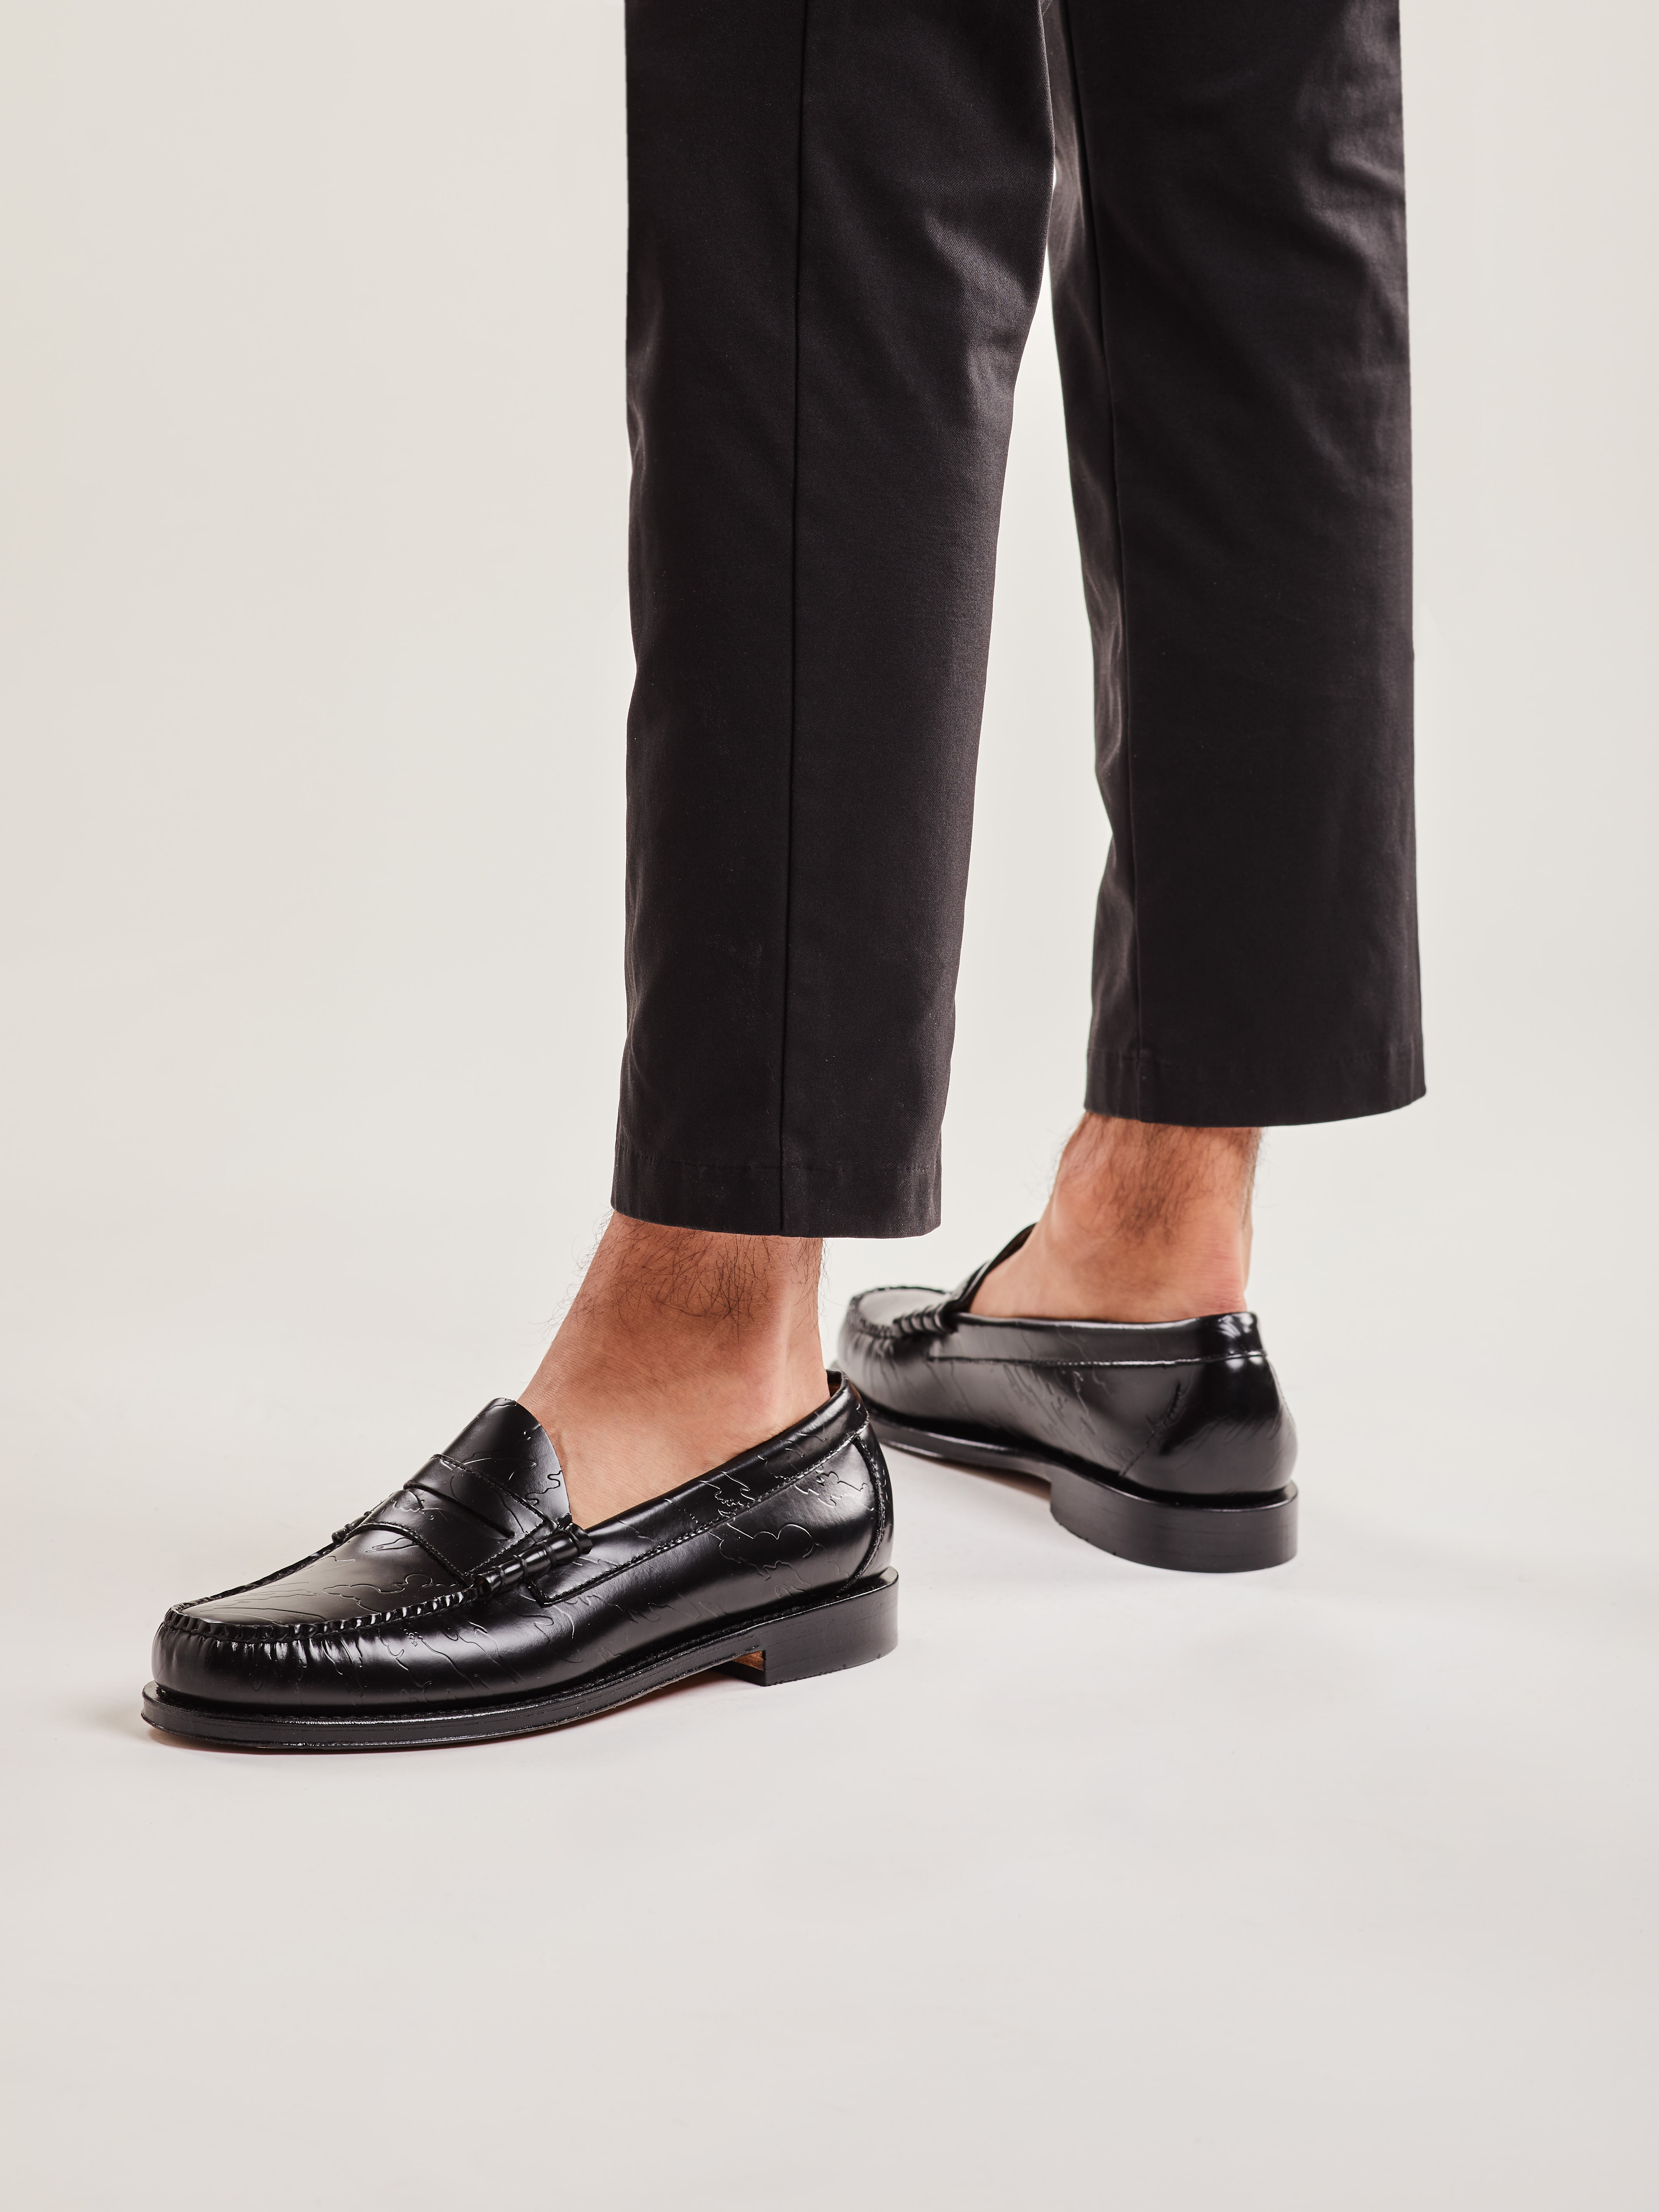 Maharishi Tap G.H Bass to Rework the Weejun Penny Loafer | Complex